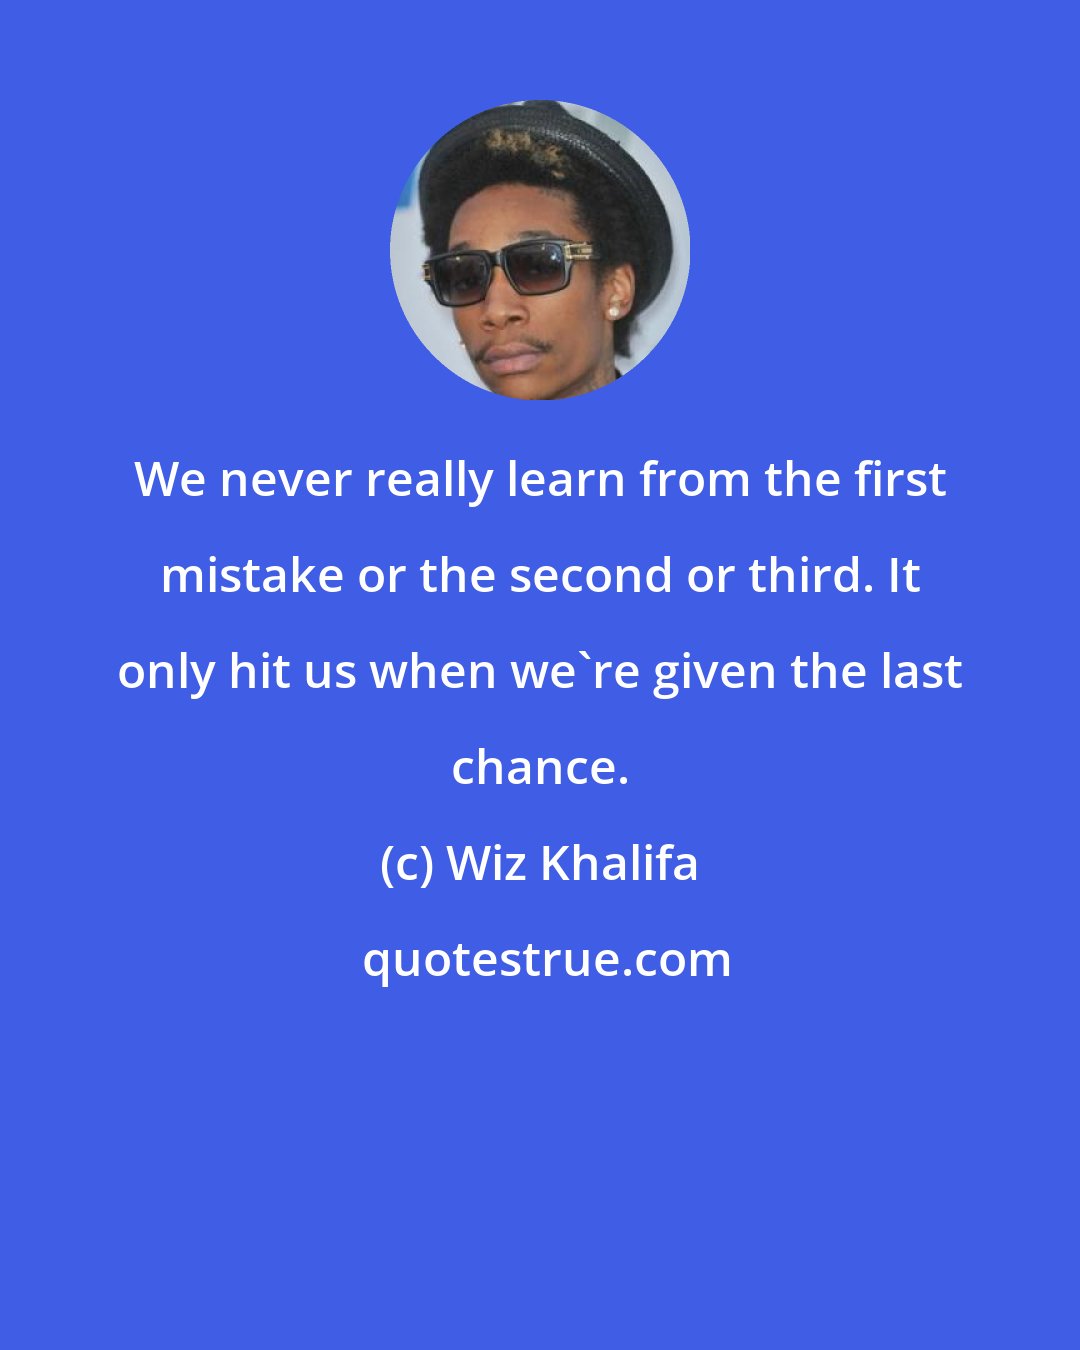 Wiz Khalifa: We never really learn from the first mistake or the second or third. It only hit us when we're given the last chance.